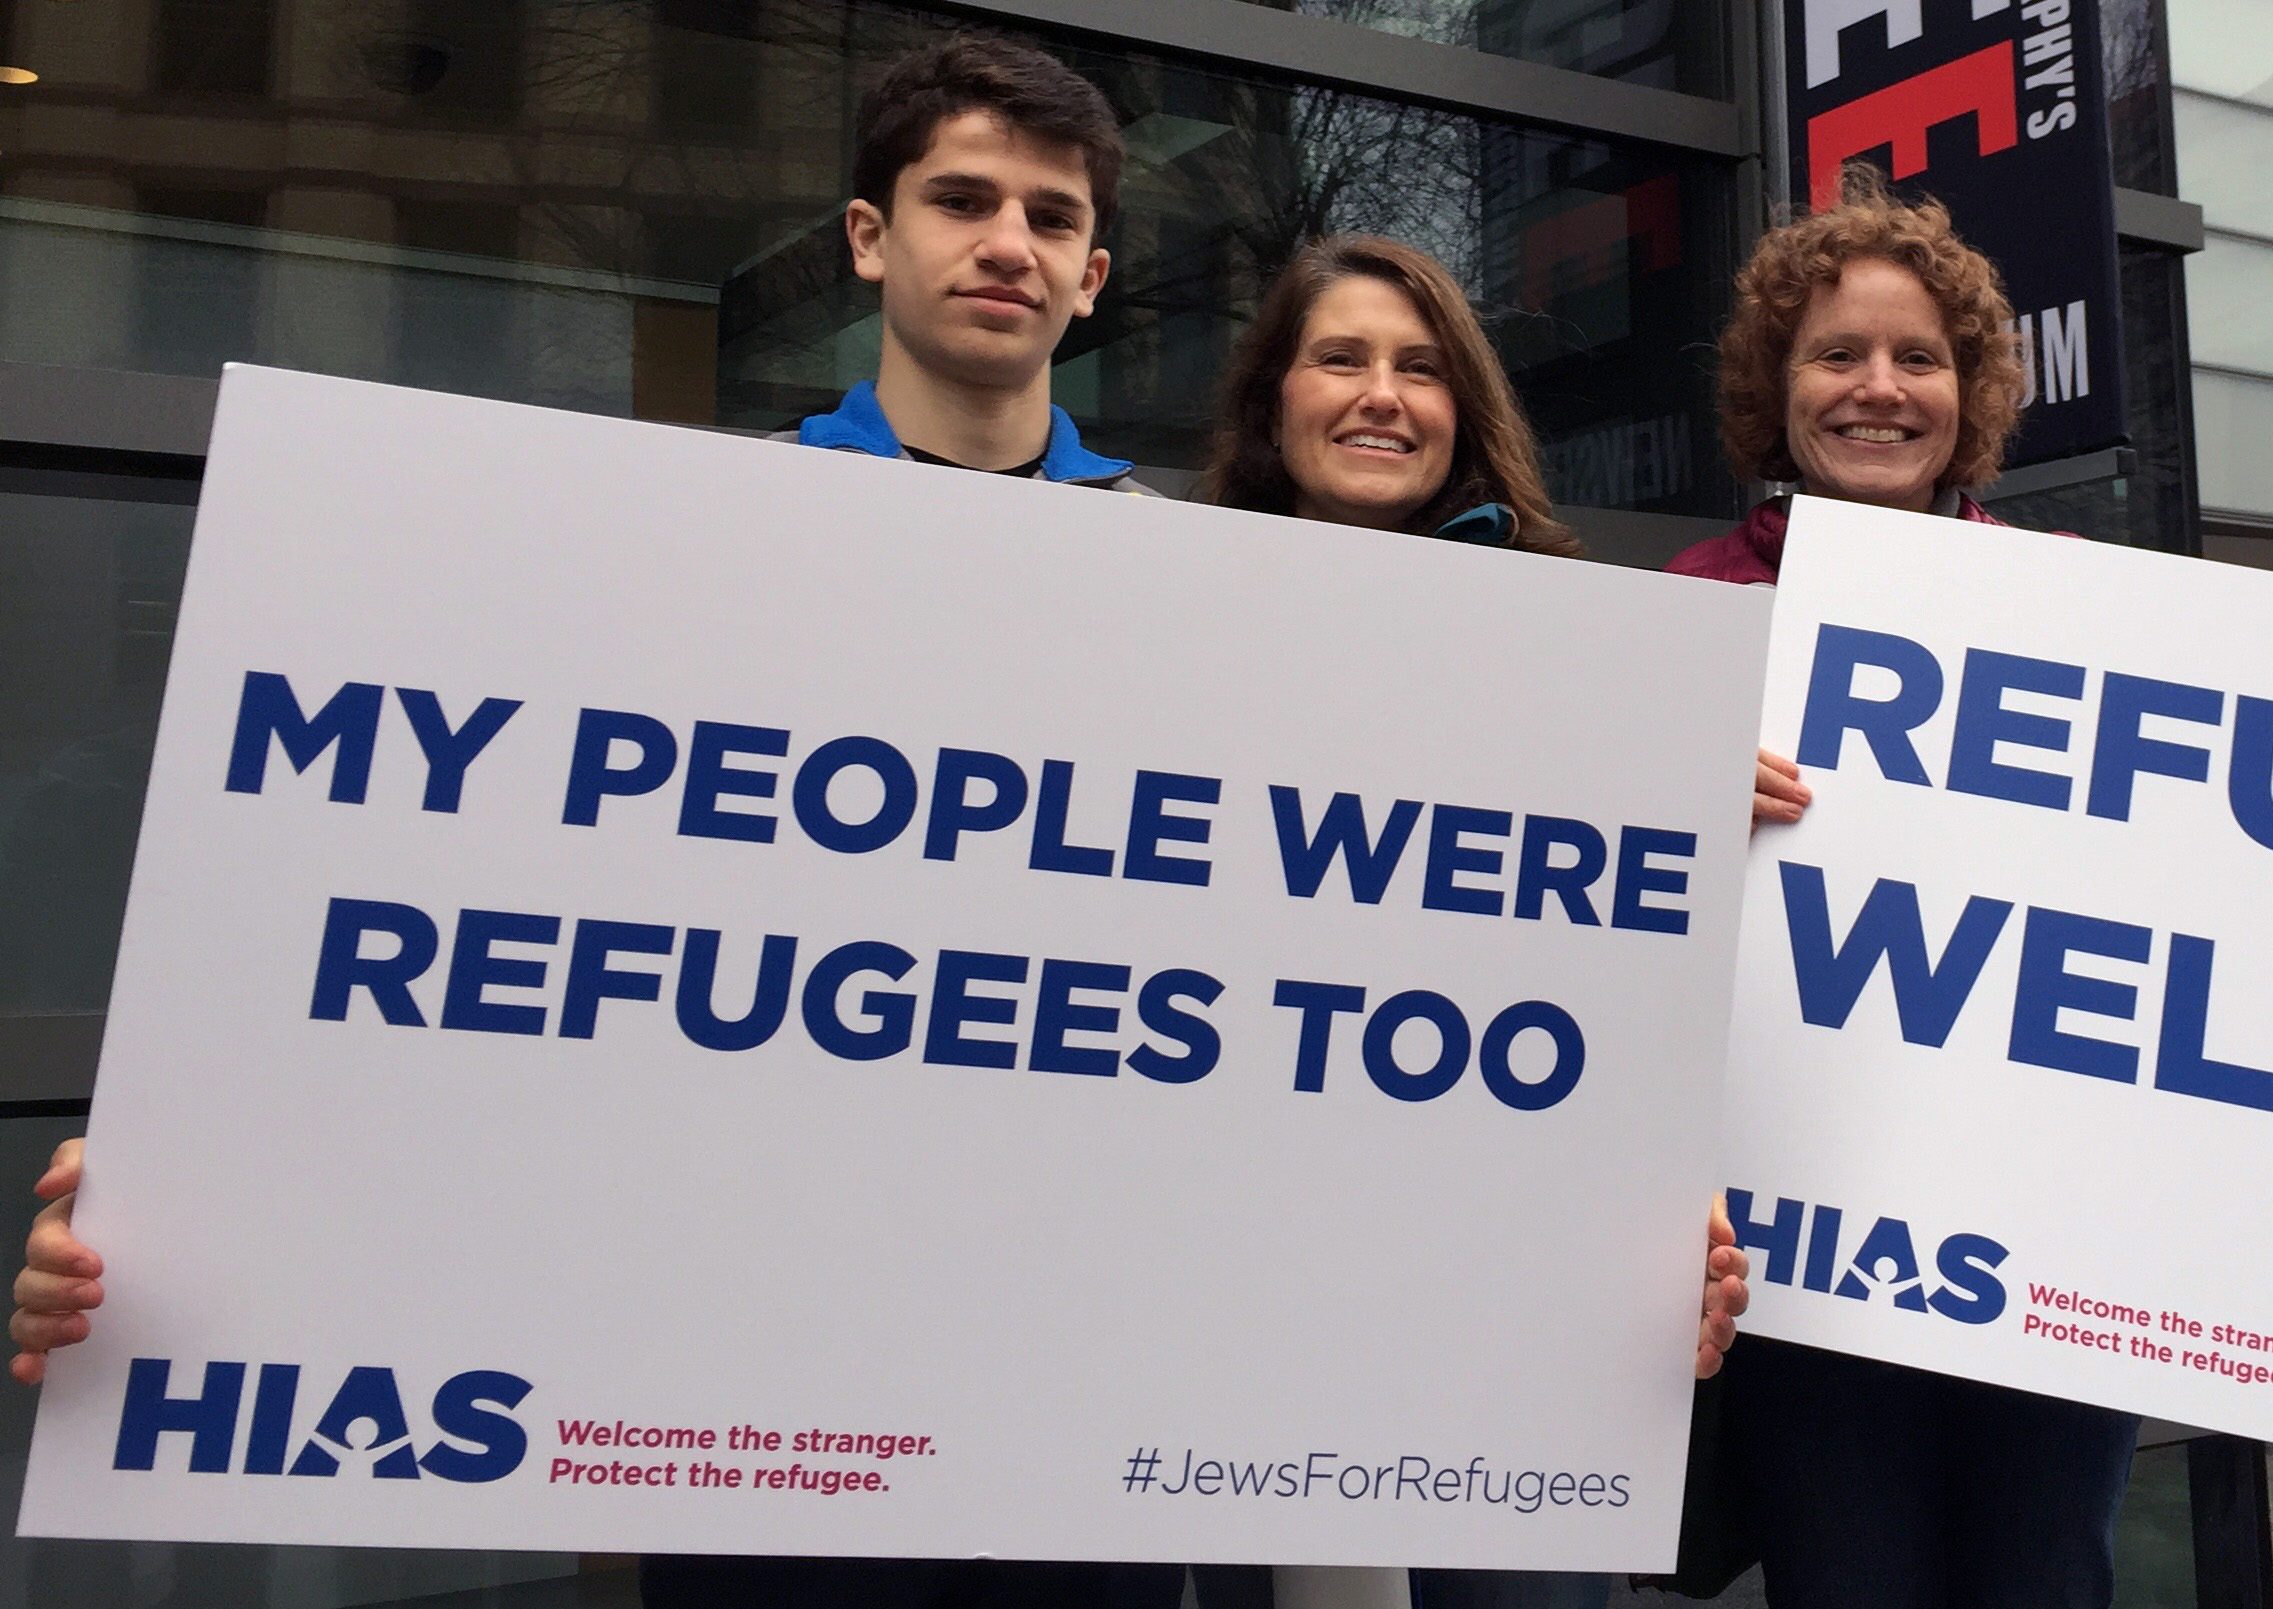 Rallying for Refugees